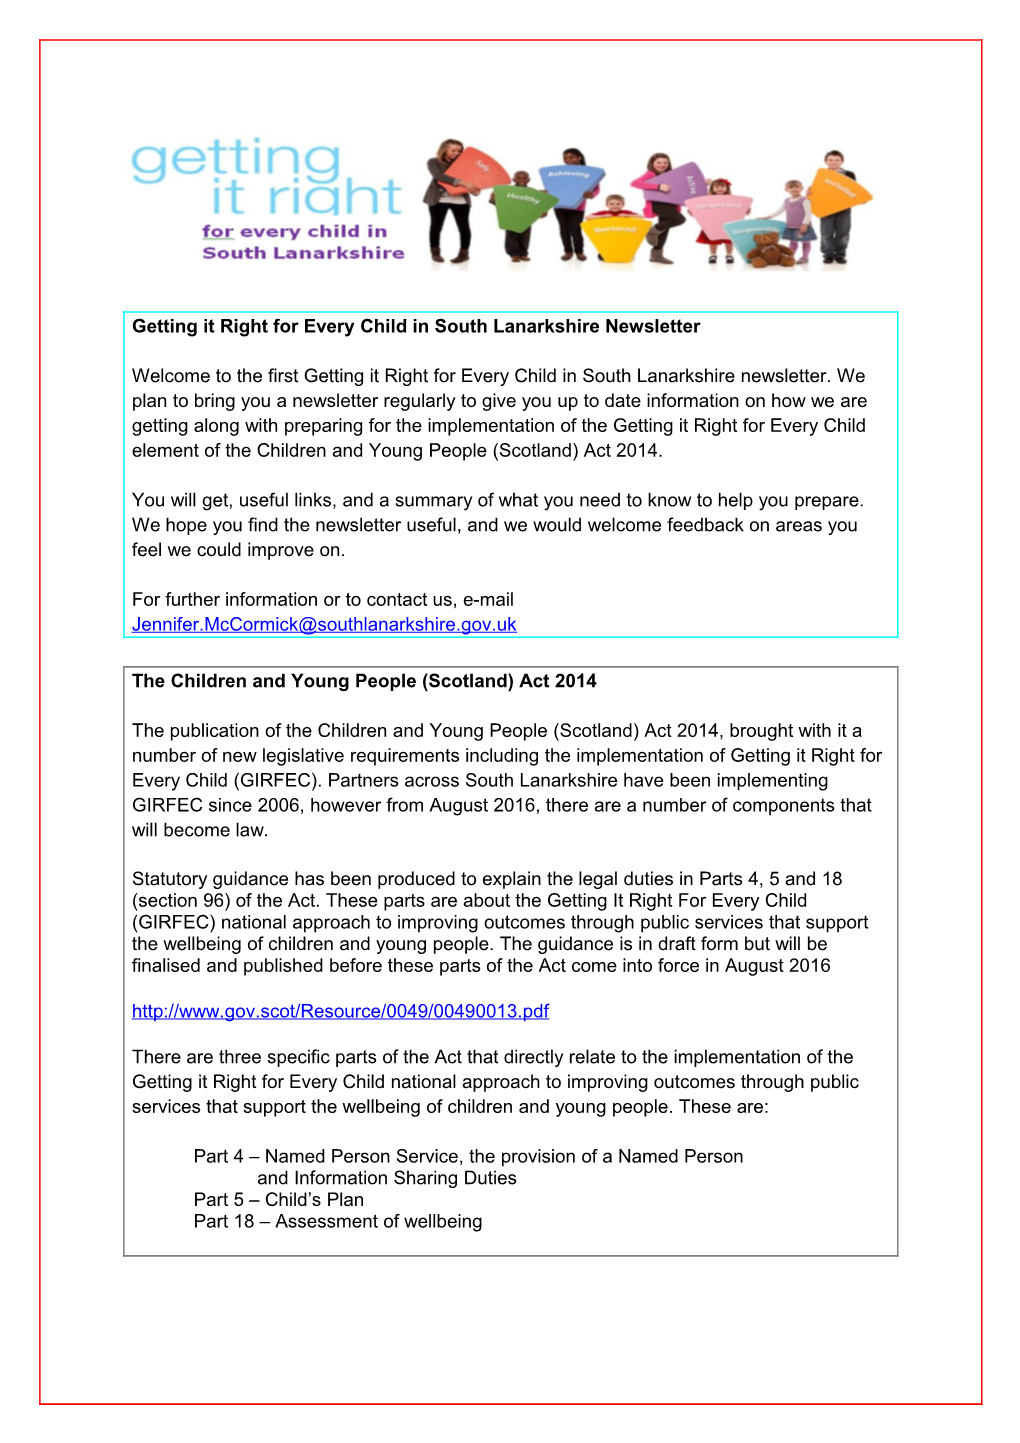 Getting It Right for Every Child in South Lanarkshire Newsletter